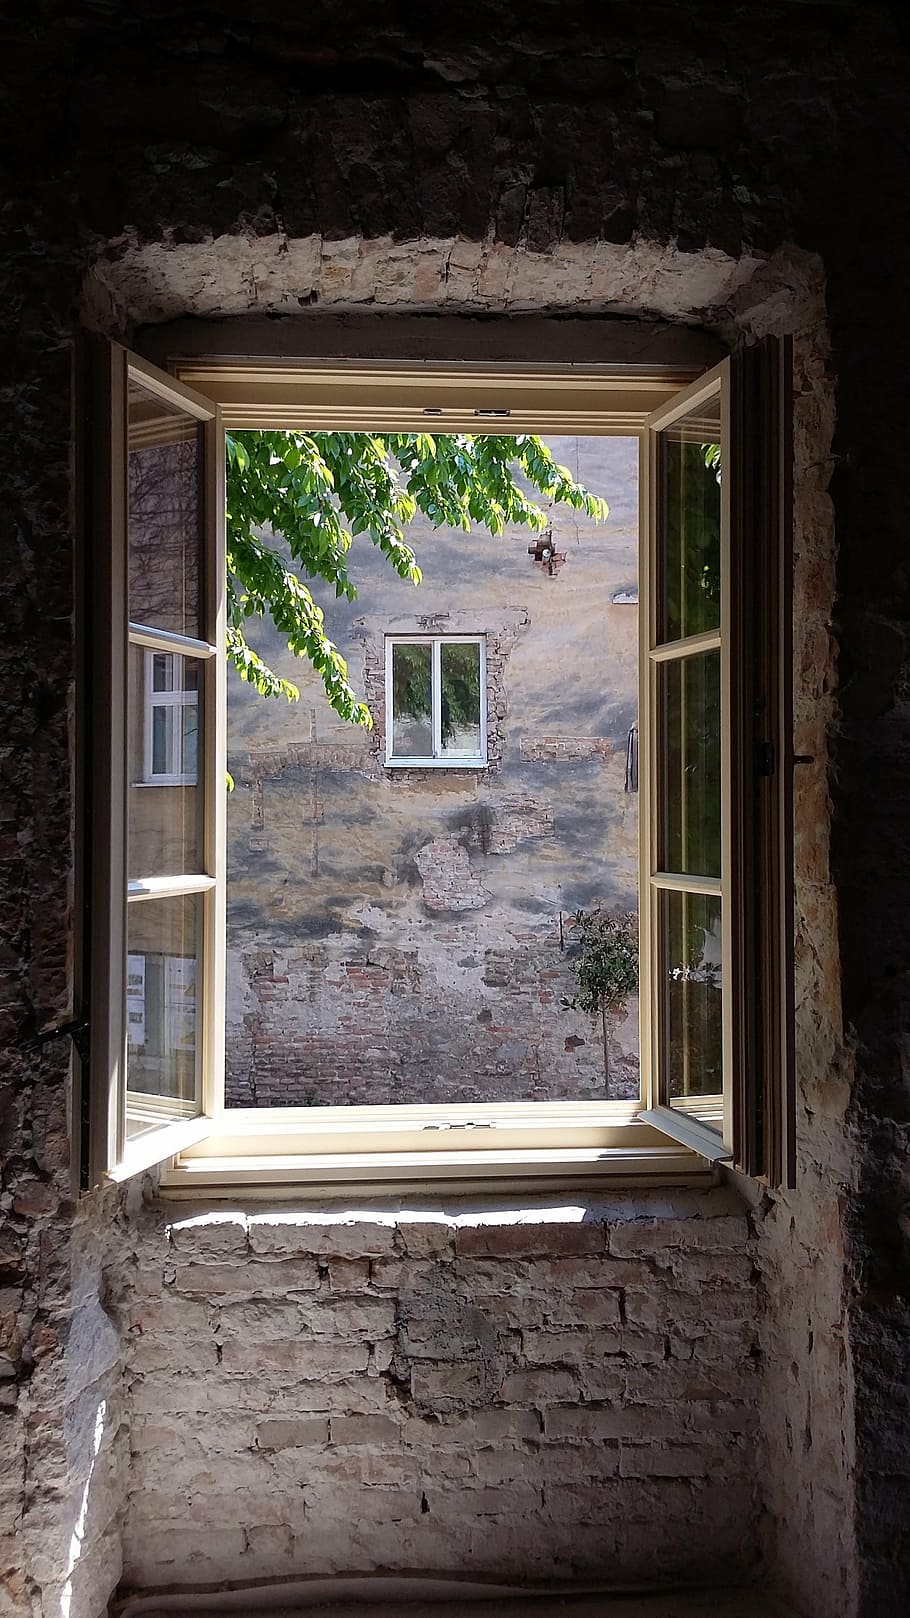 window, in the window, open, old, house, architecture, building Exterior, facade, europe, built structure